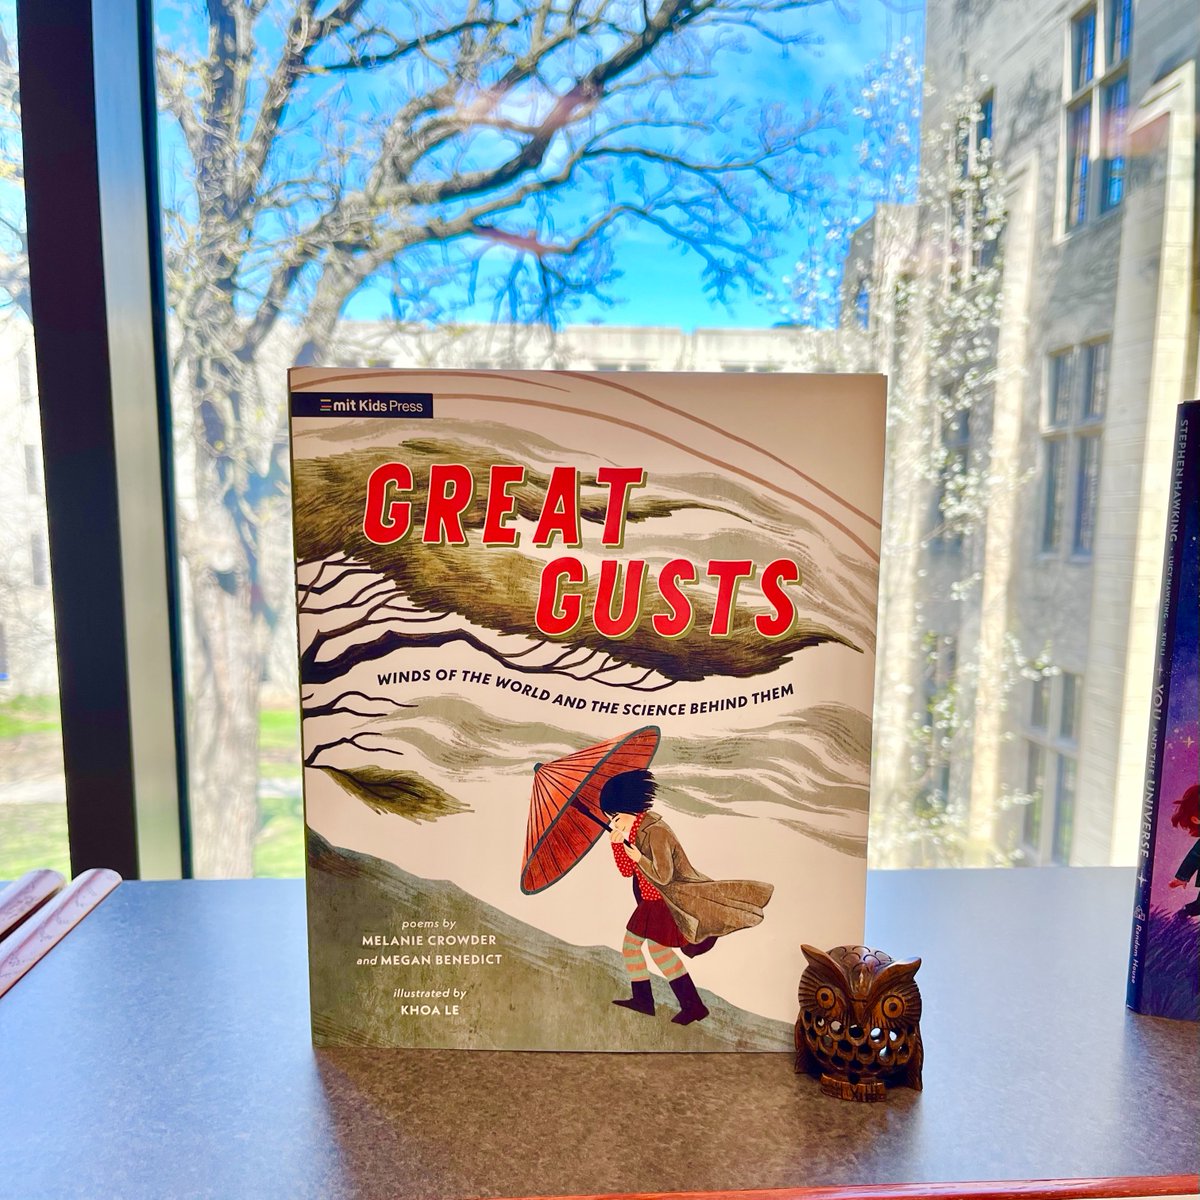 📚💨 Great Gusts: Winds of the World and the Science Behind Them by Melanie Crowder and Megan Benedict and illustrated by Khoa Le. #dailybutlershelfie #BigWindDay #GreatGusts #MelanieCrowder #MeganBenedict #KhoaLe @MITKidsPress